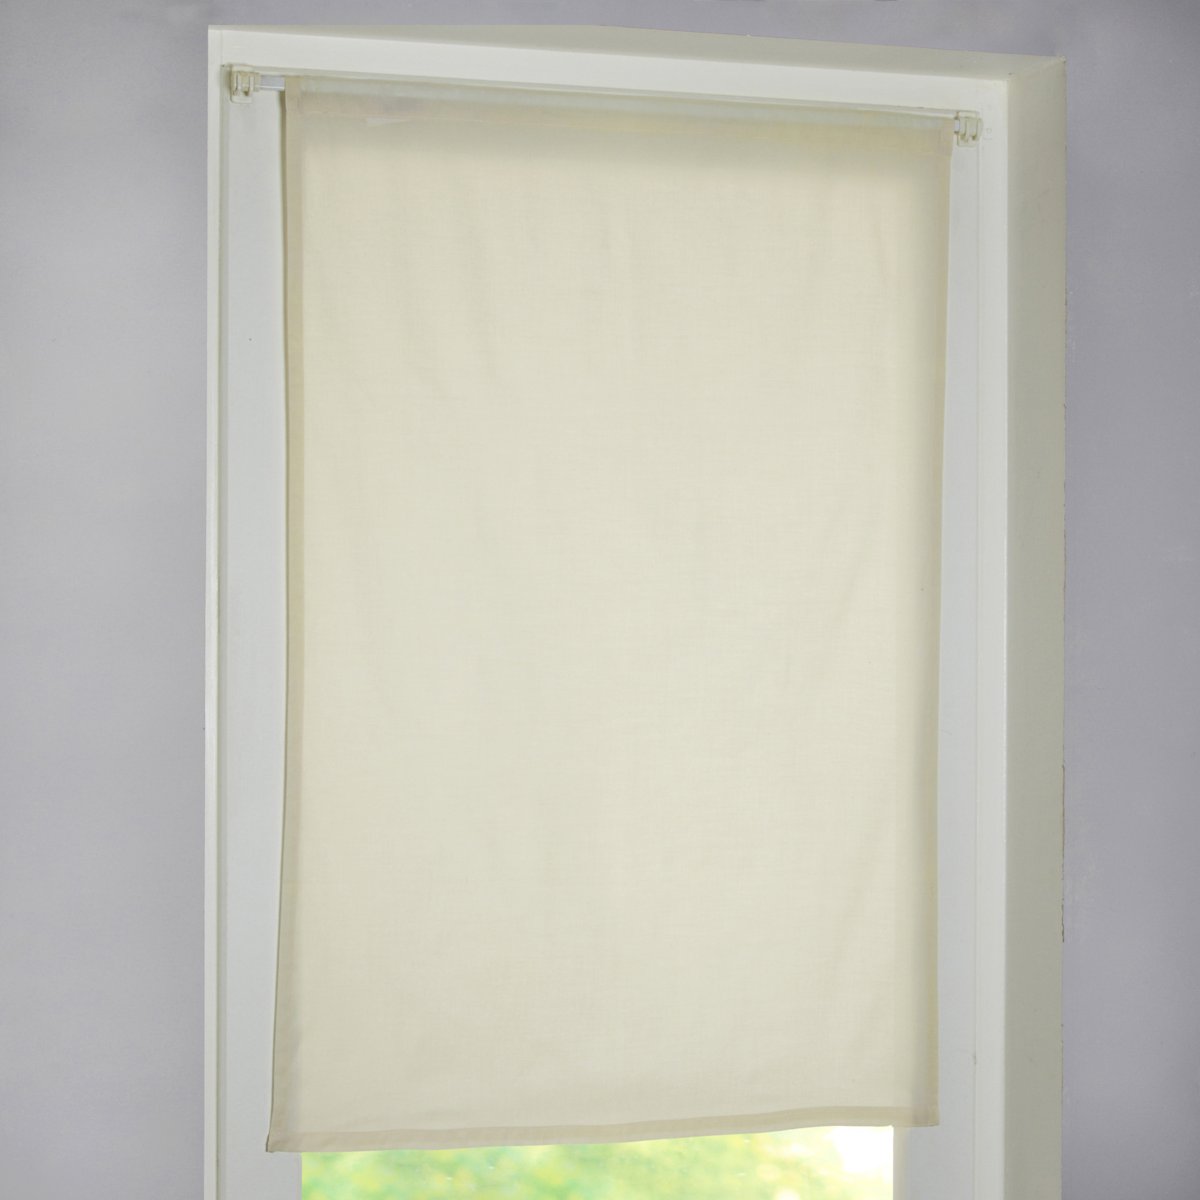 Image of Morino Single Cotton Voile Panel with Rod Pocket Header